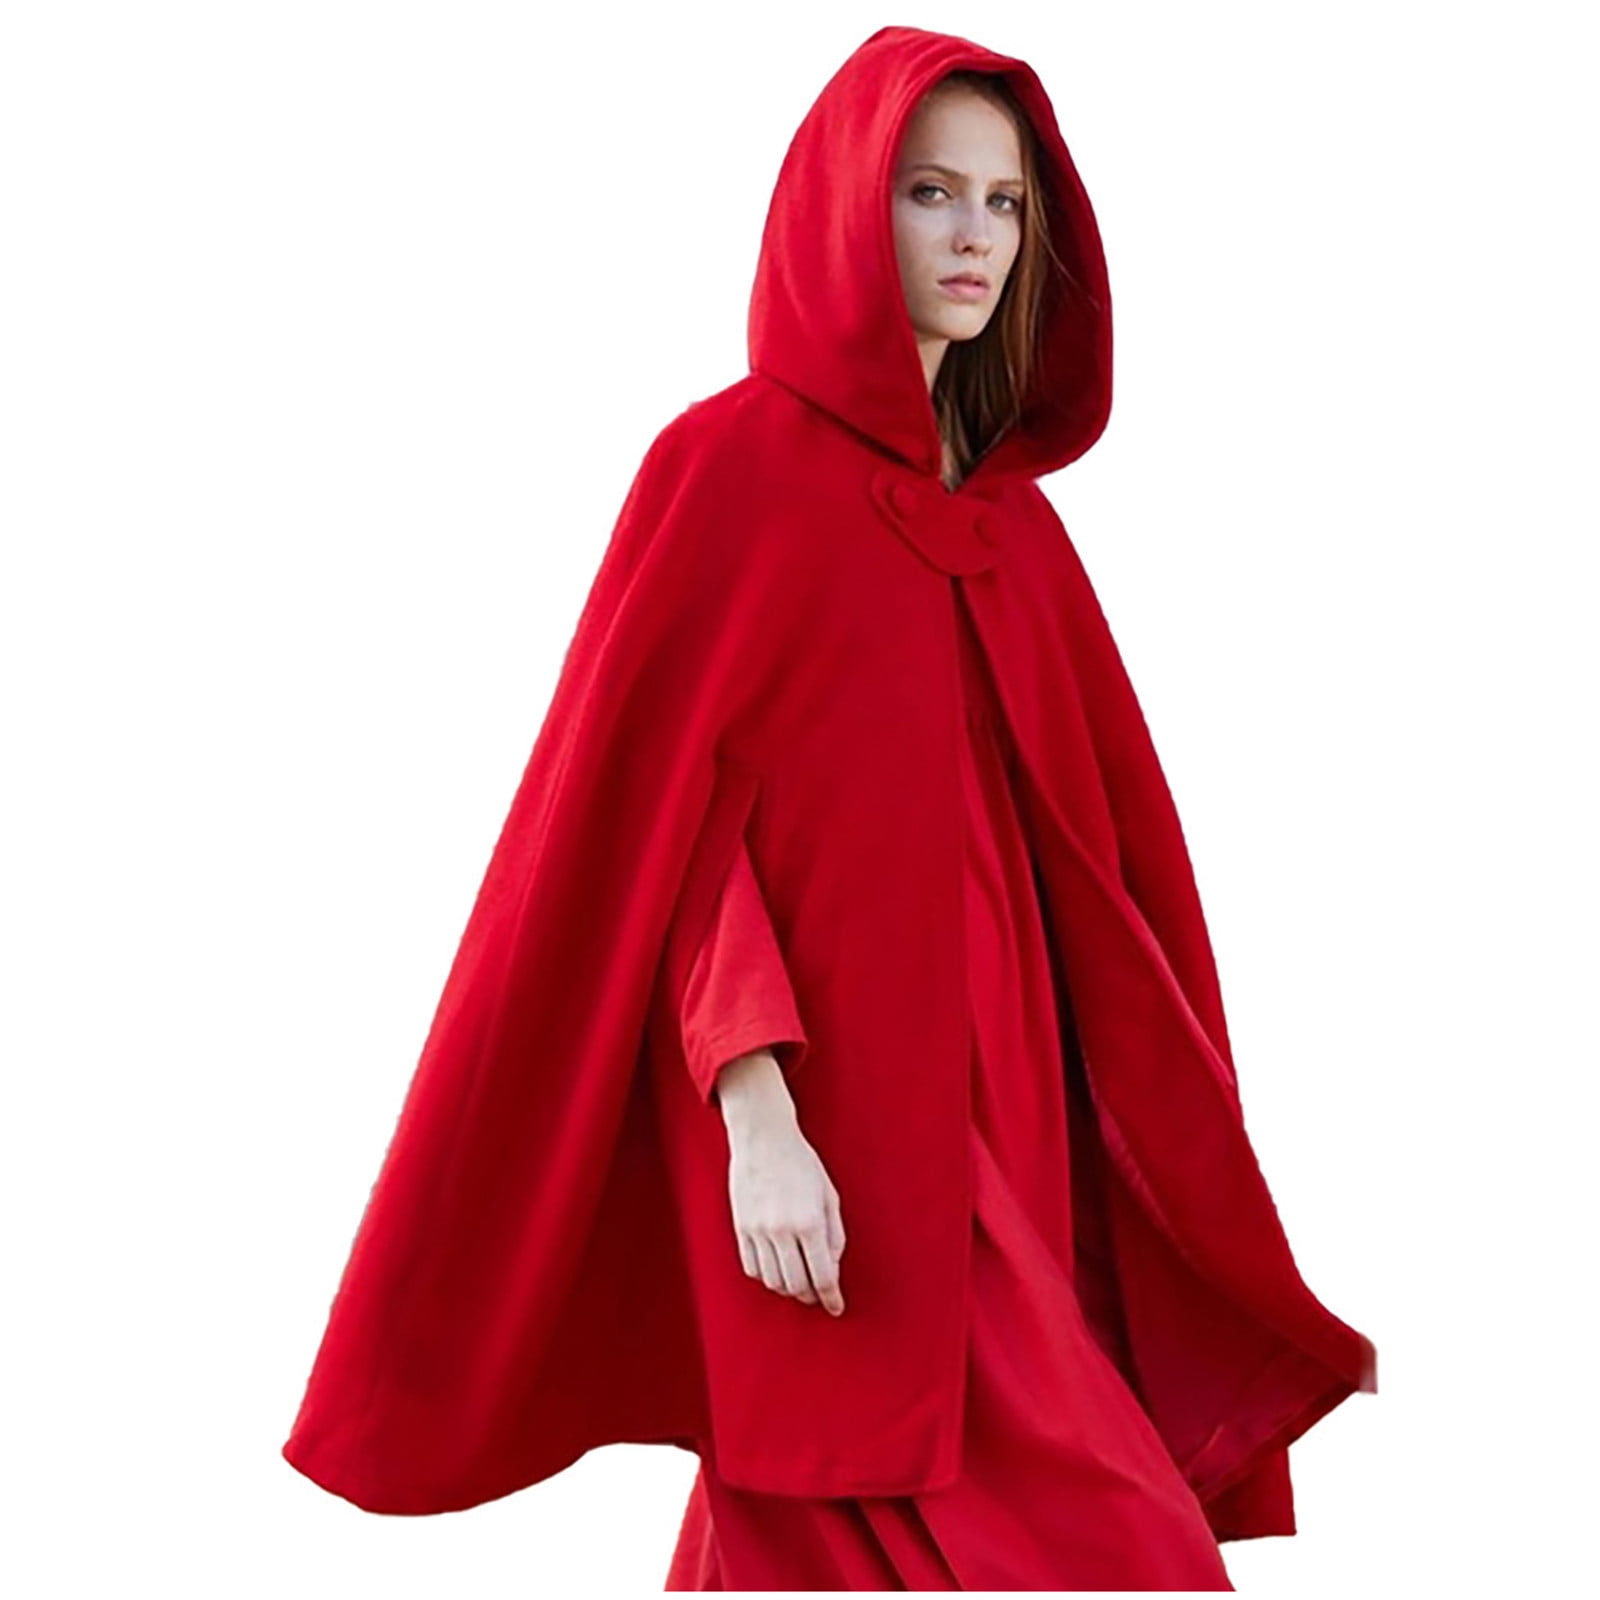 Women's Wool Cloak Coat with Hood, Maxi Hooded Cape for Winter, Plus Size Medieval Cloak